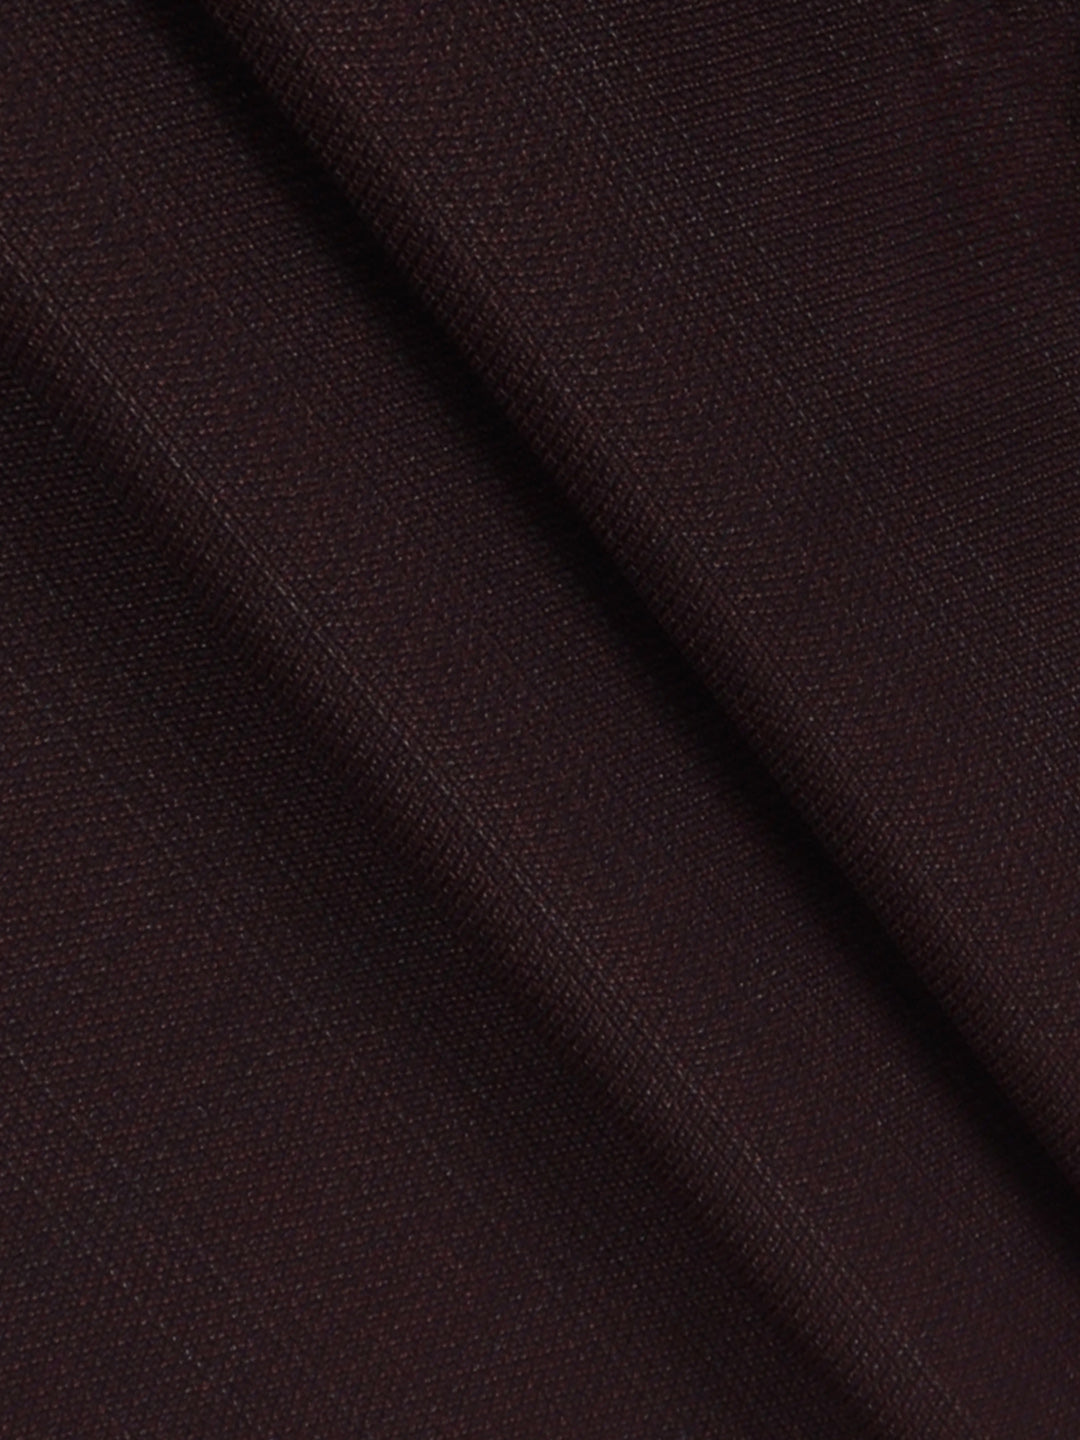 Premium Cotton Colour Checked Pants Fabric Brown Style Craft